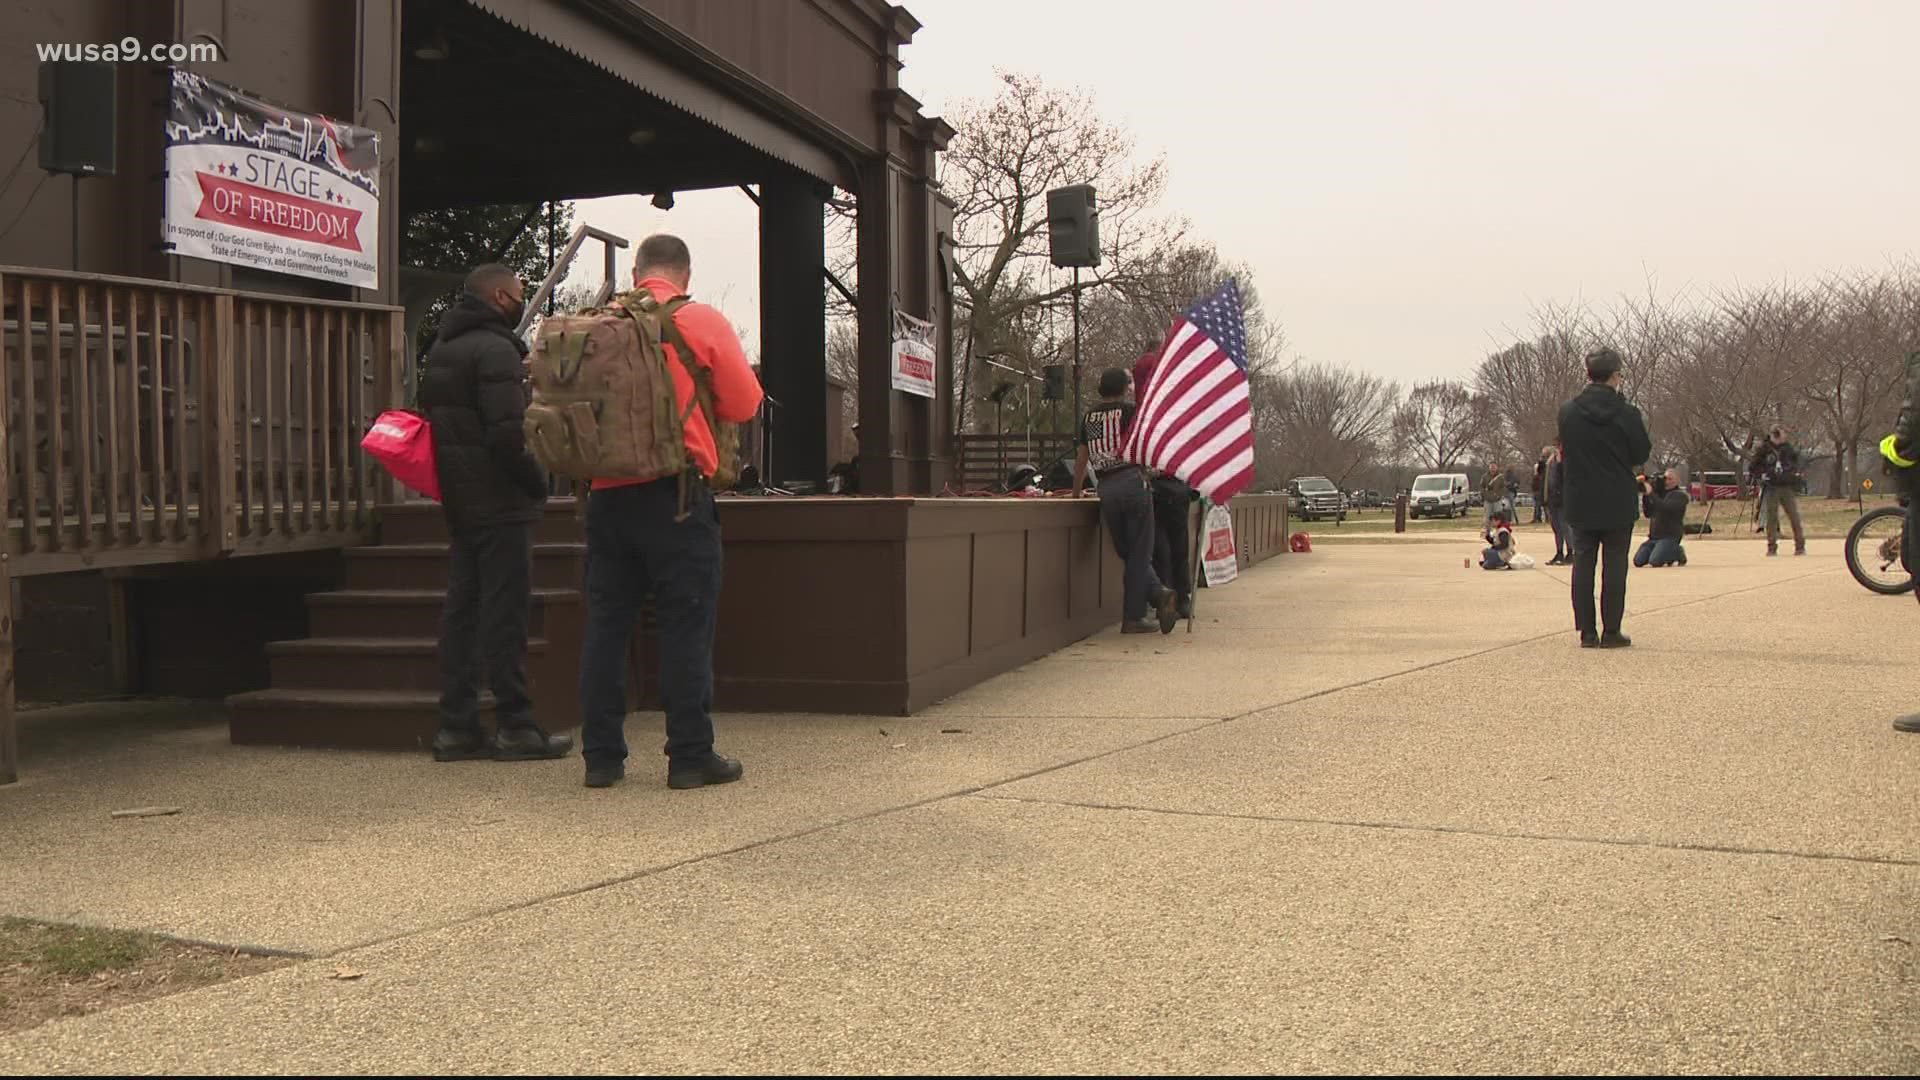 One protest started around noon but fizzled quickly, and at most about 20 people gathered at the Sylvan Theatre near the Washington Monument.